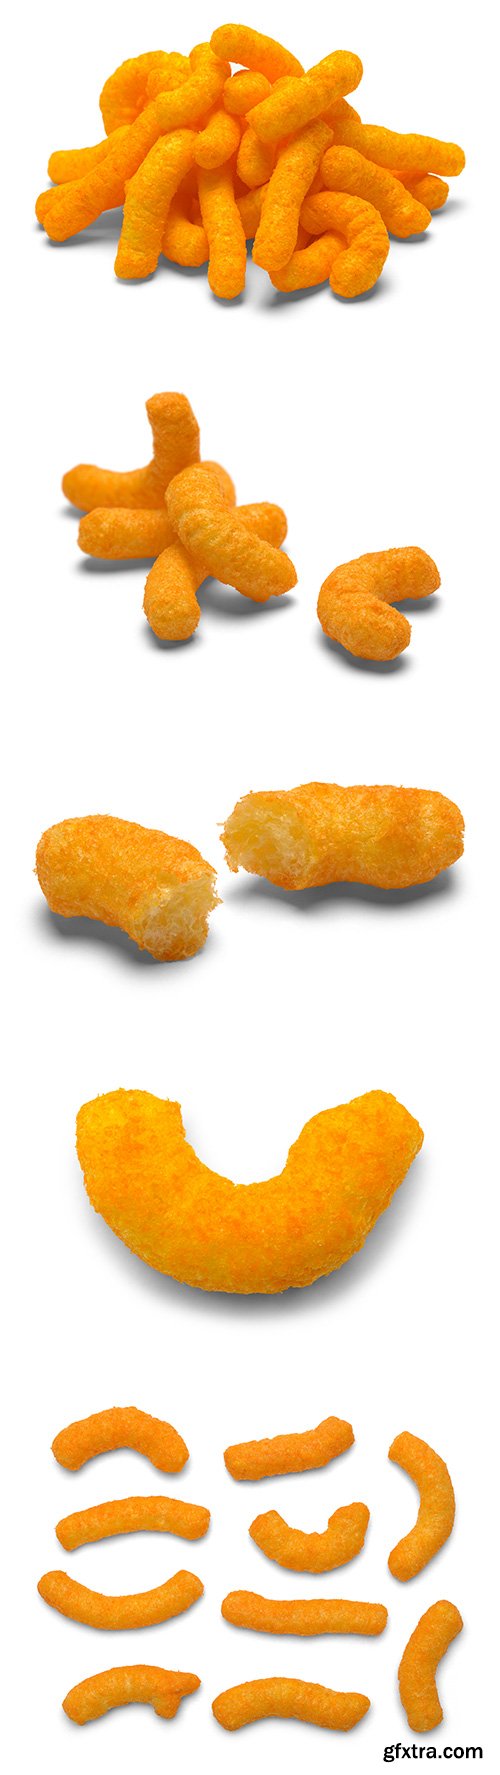 Cheese Puffs Isolated - 6xJPGs